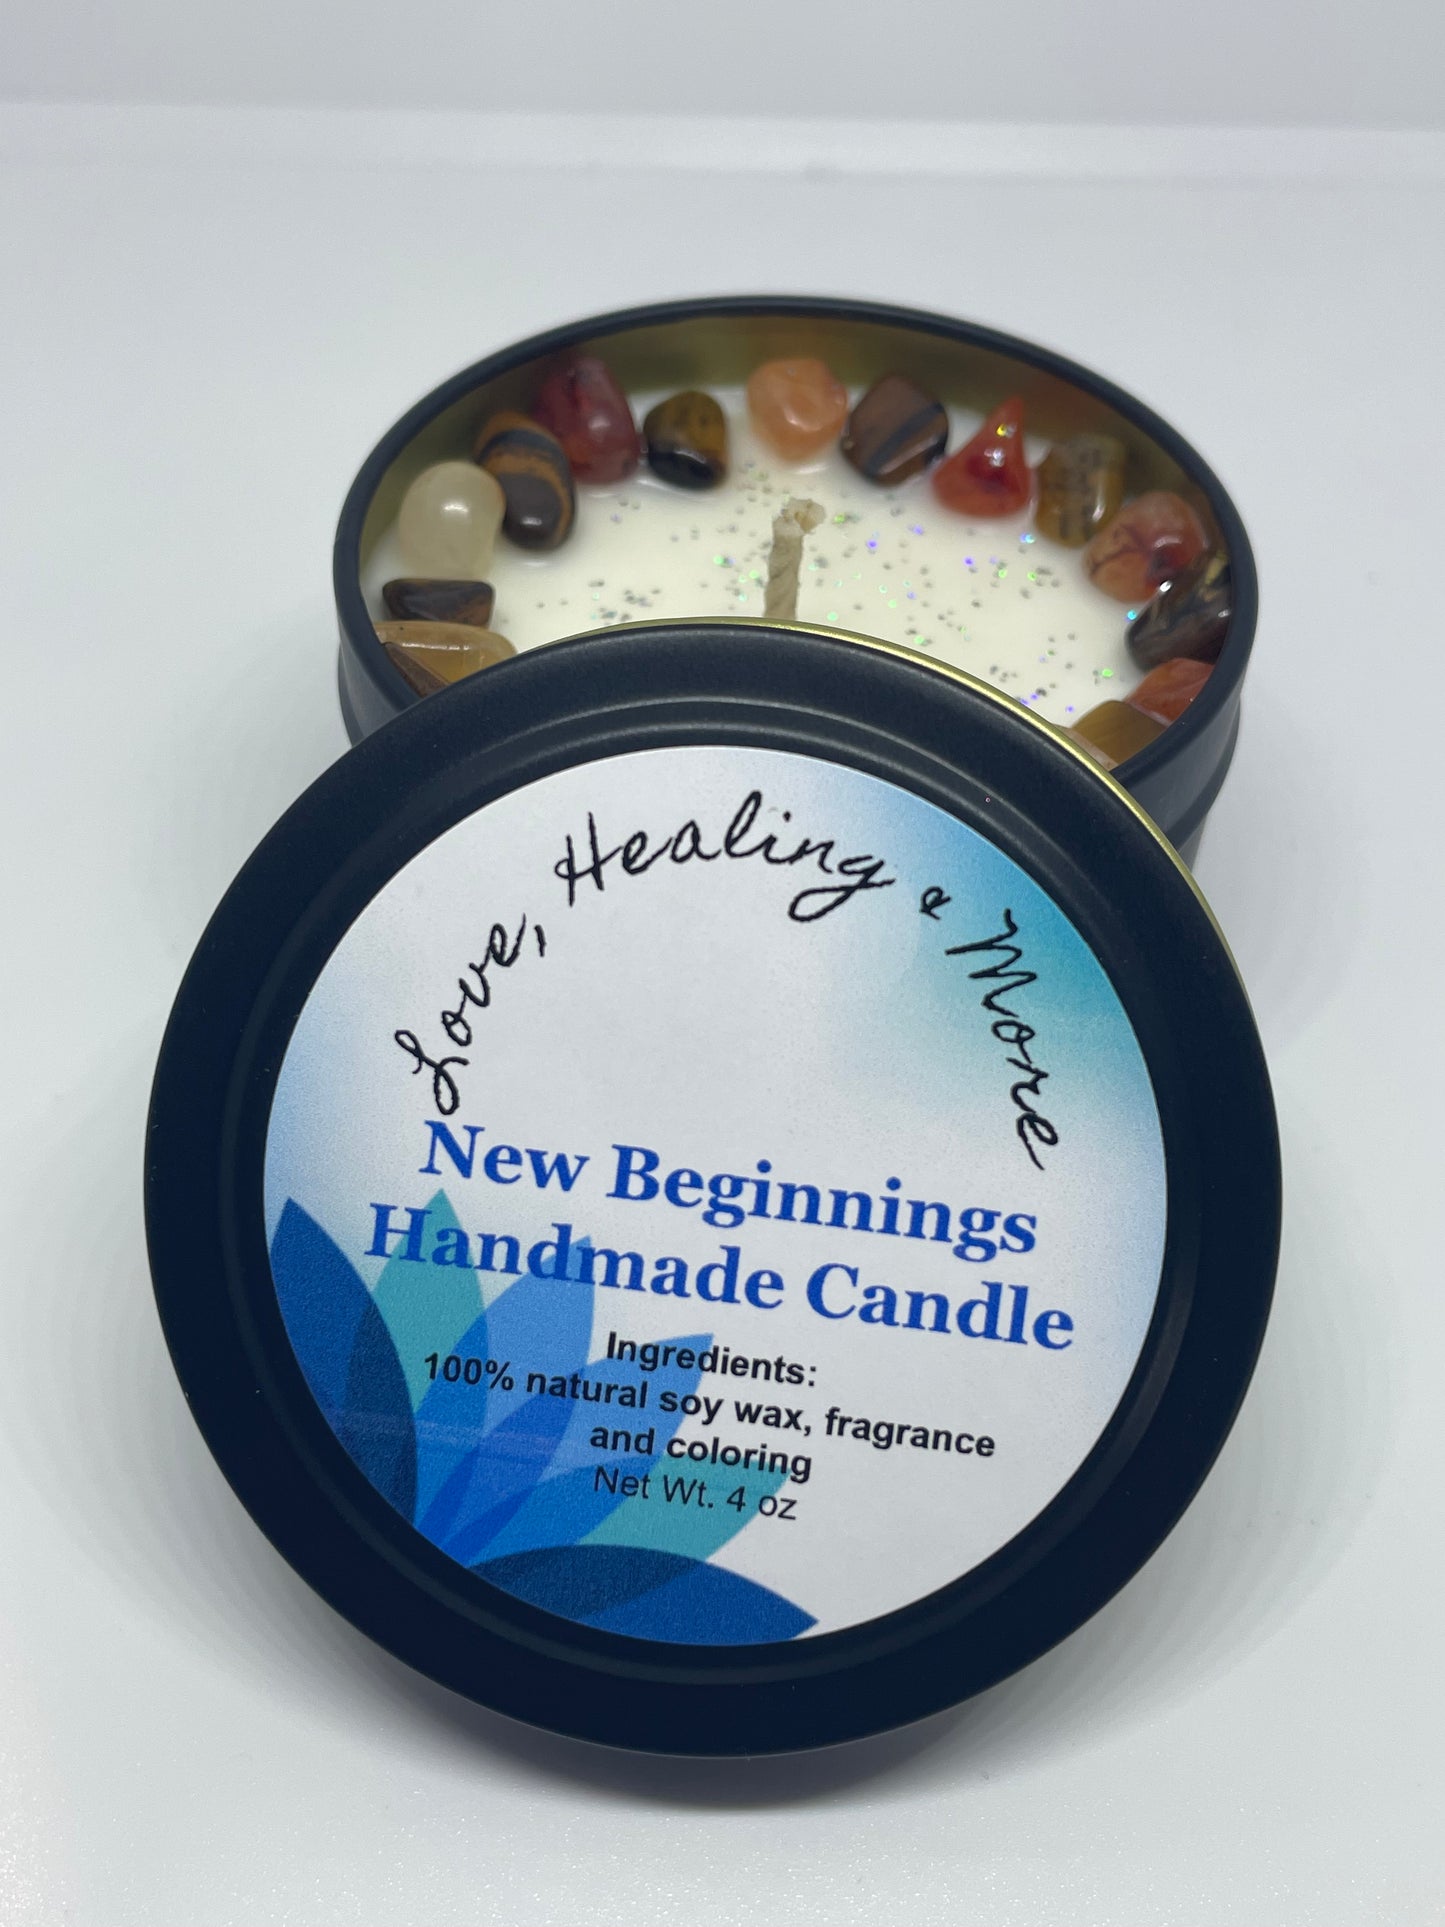 Handmade 4 oz. and 8 oz. Reiki Infused New Beginnings Fragrance Candle